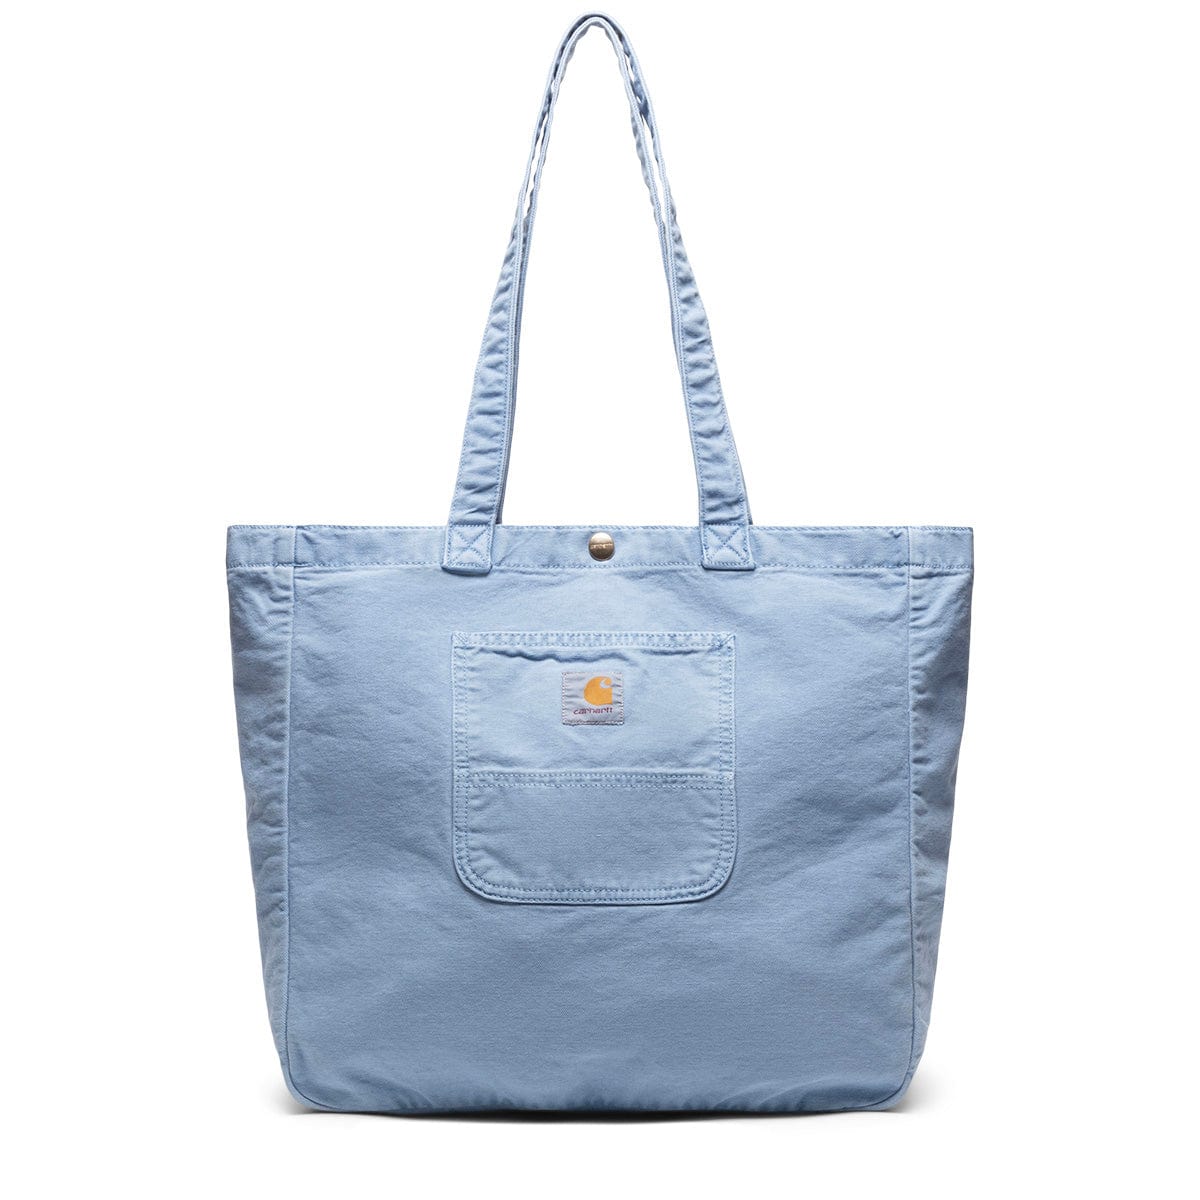 Carhartt WIP Bags PISCINE FADED / O/S BAYFIELD TOTE